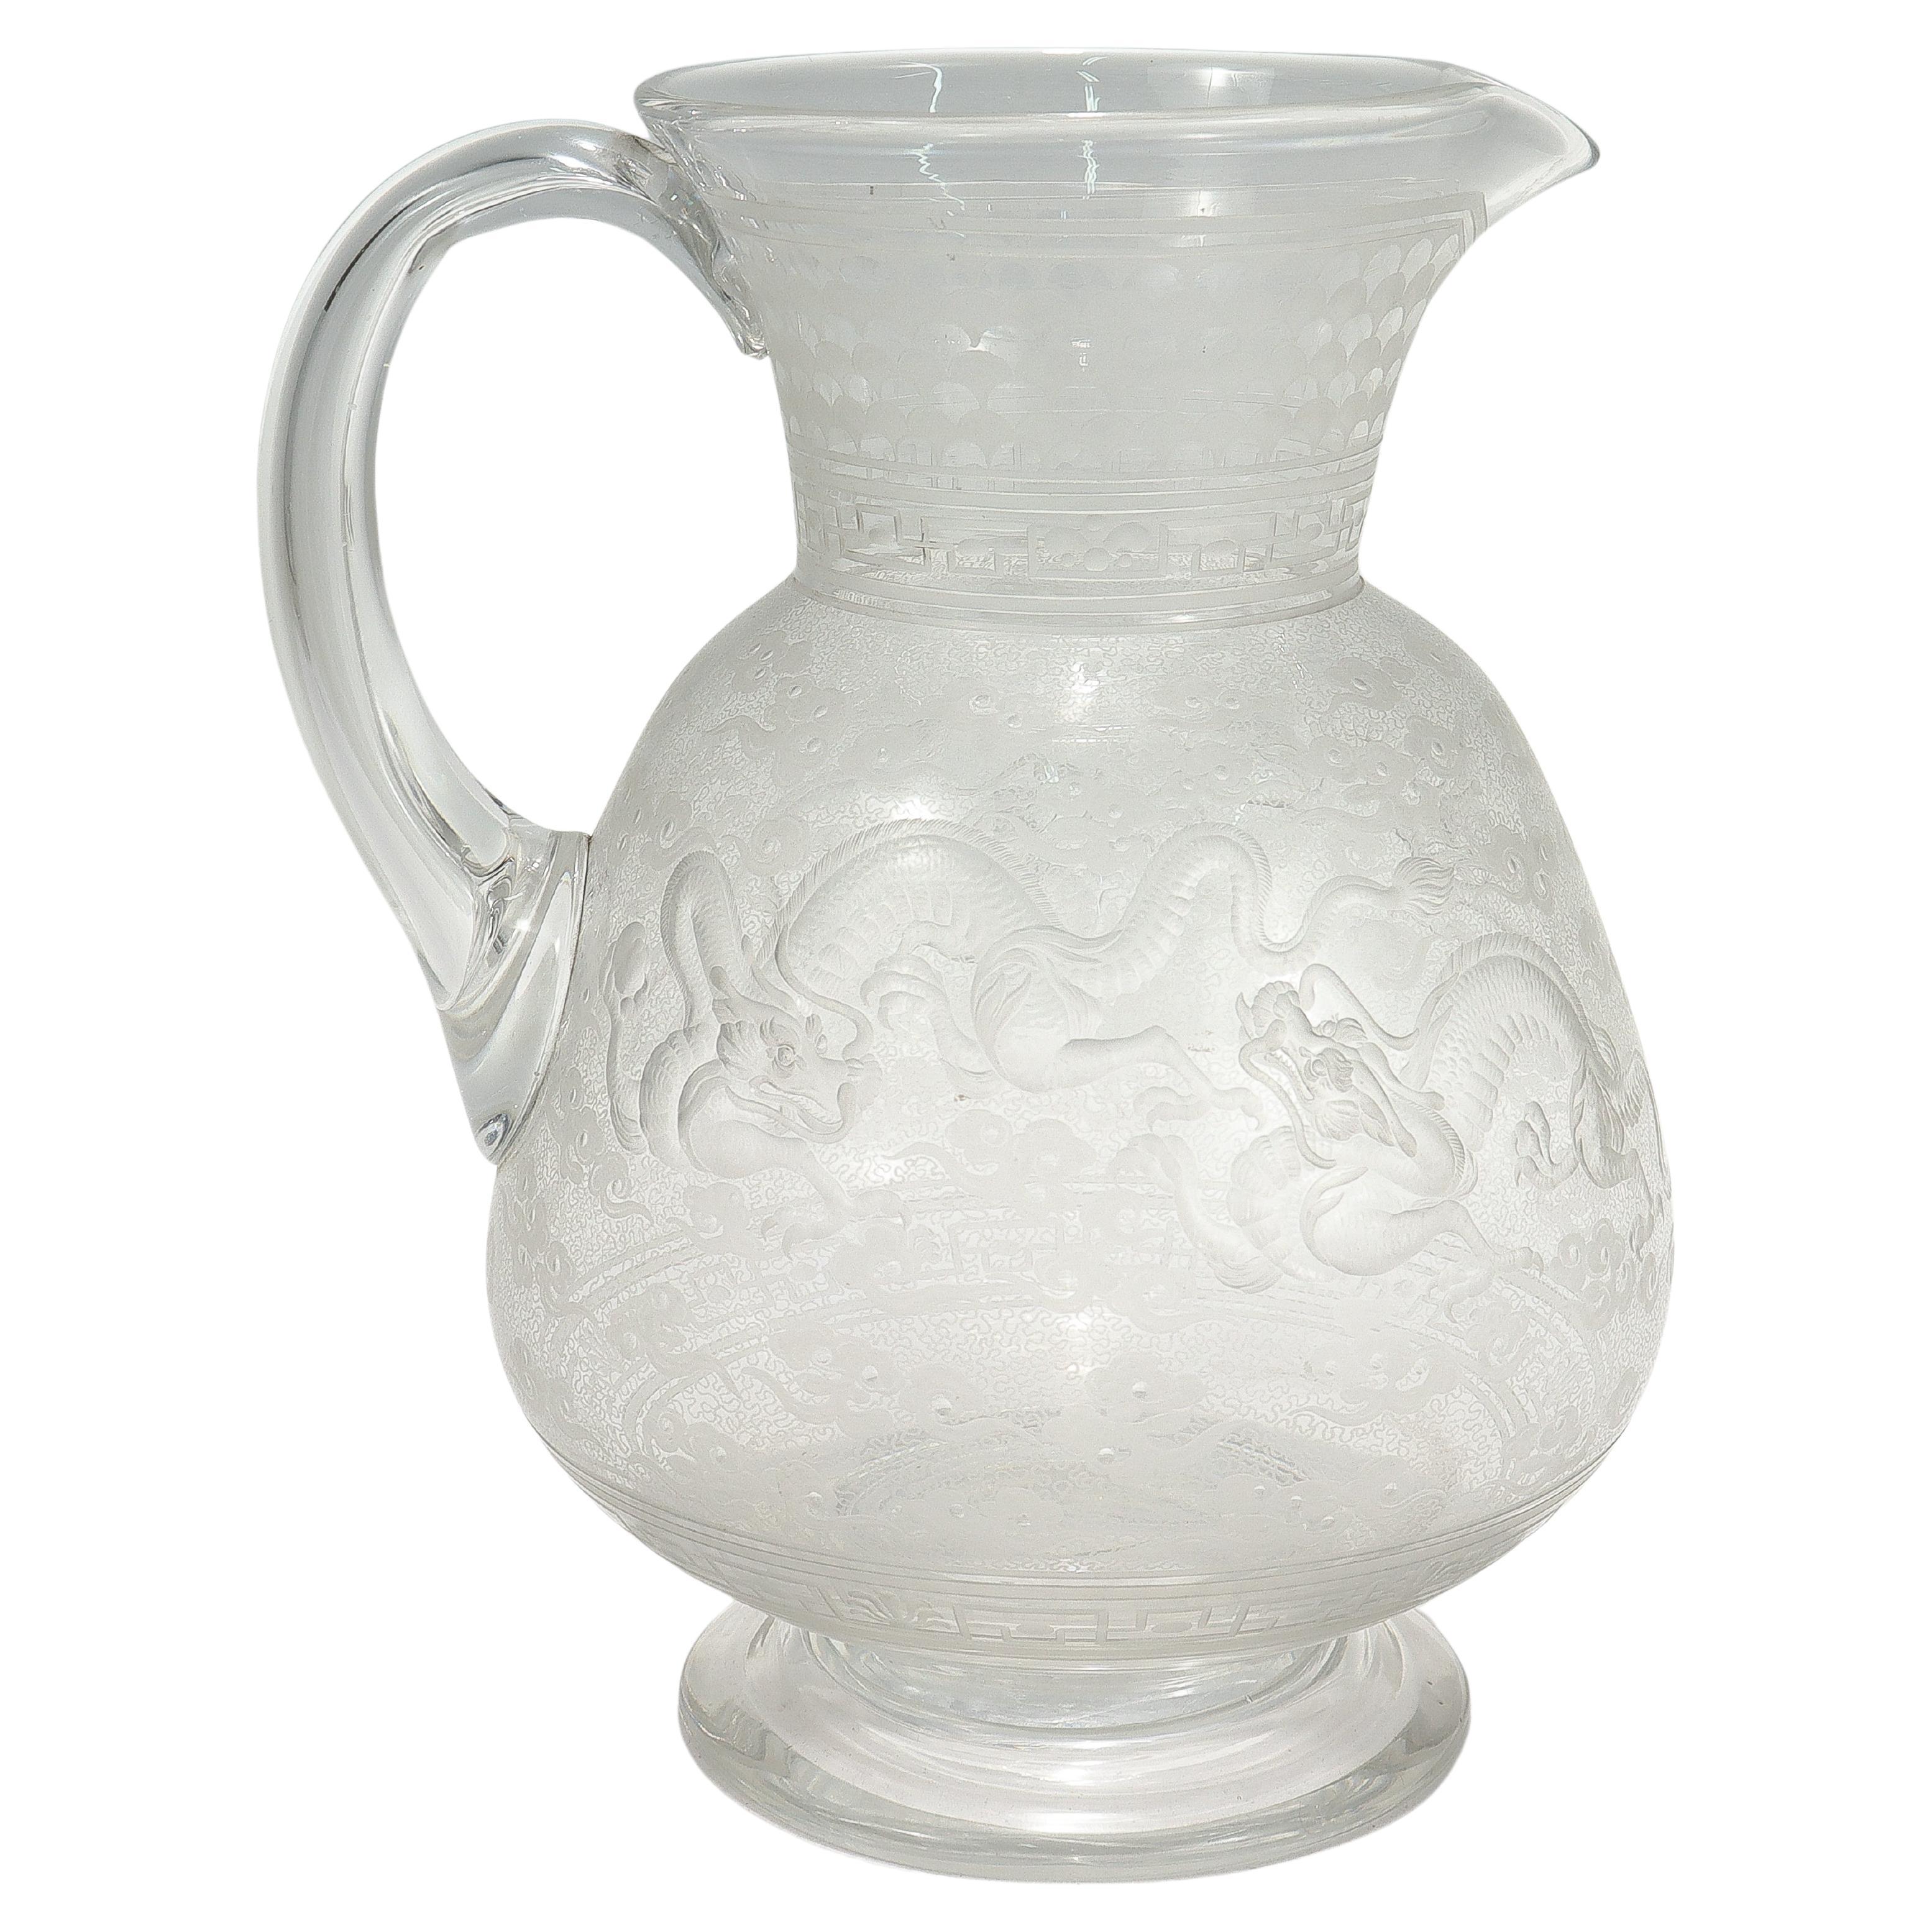 Antique Kny Attributed Stourbridge Engraved Glass Pitcher with Chinese Dragons For Sale